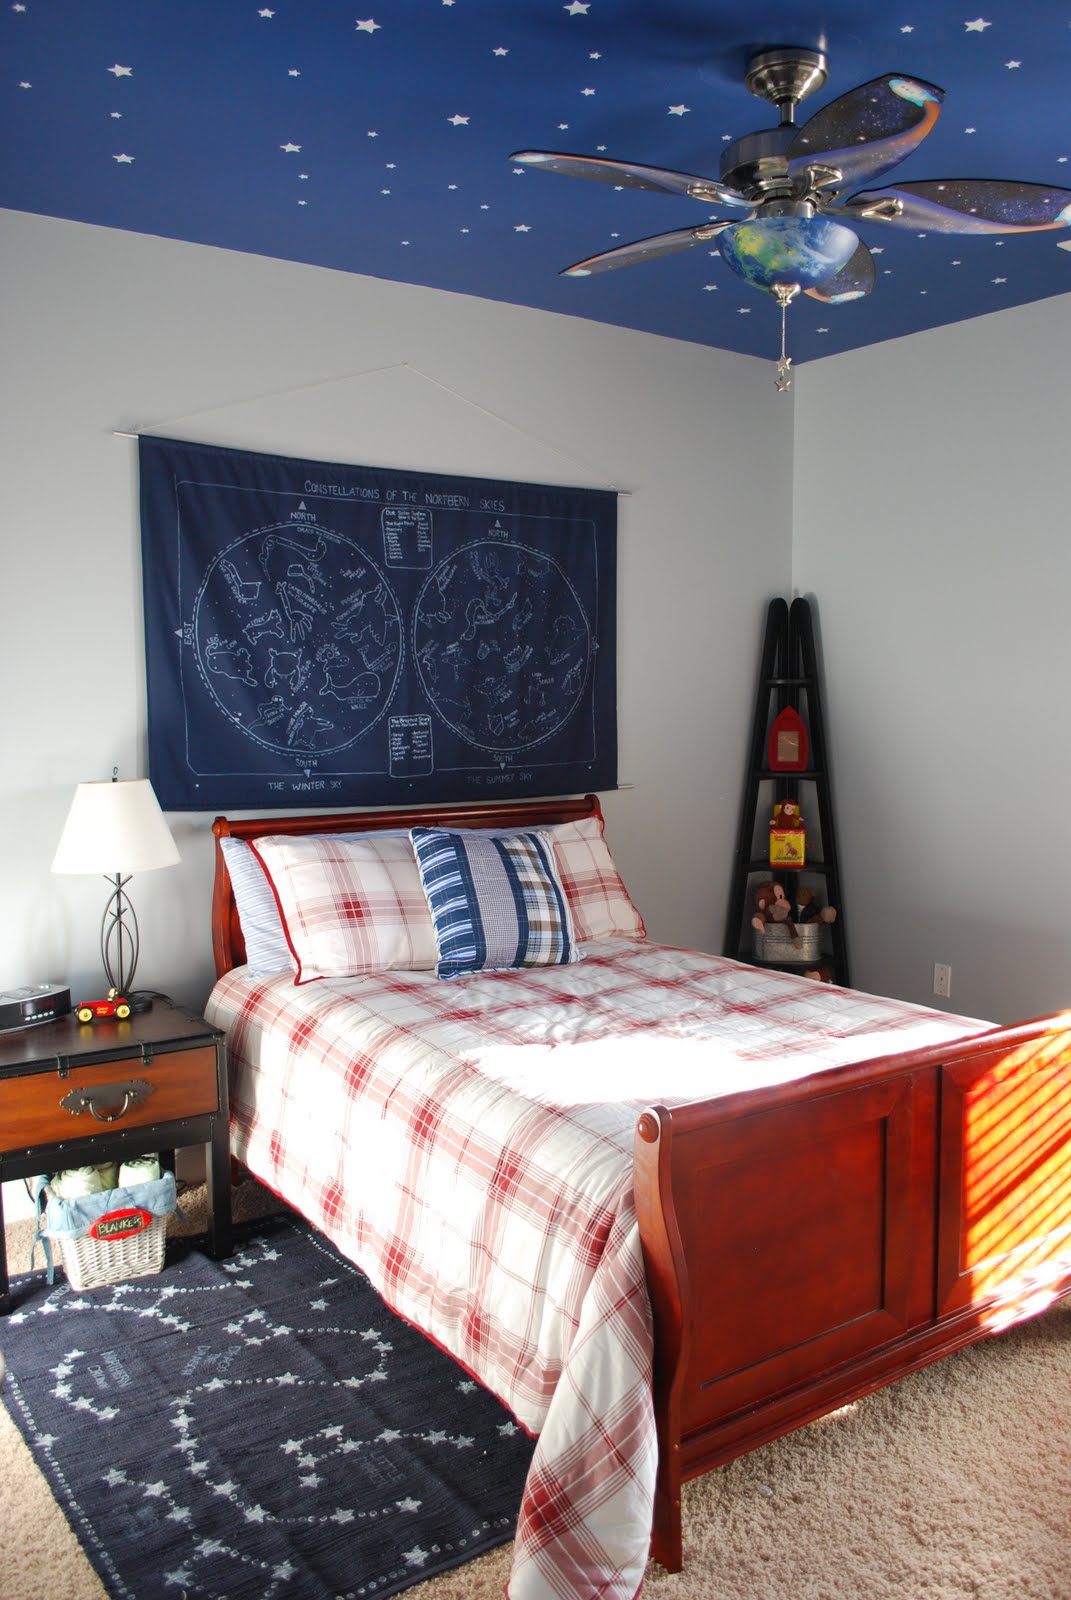 Wench Wisdom: E's Space Themed Room